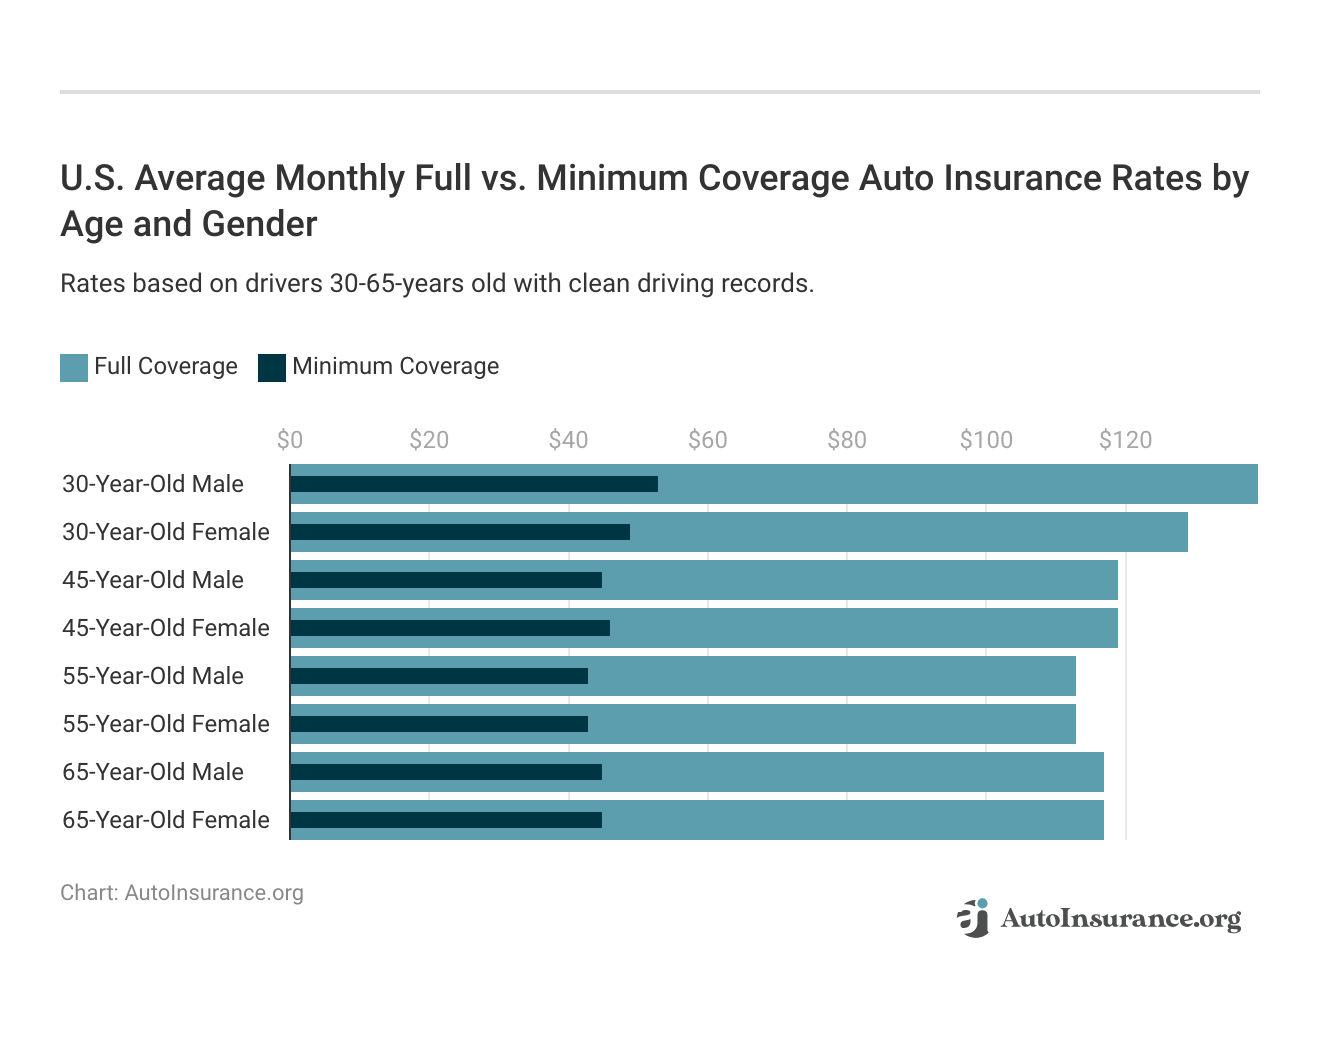 <h3>U.S. Average Monthly Full vs. Minimum Coverage Auto Insurance Rates by Age and Gender</h3>